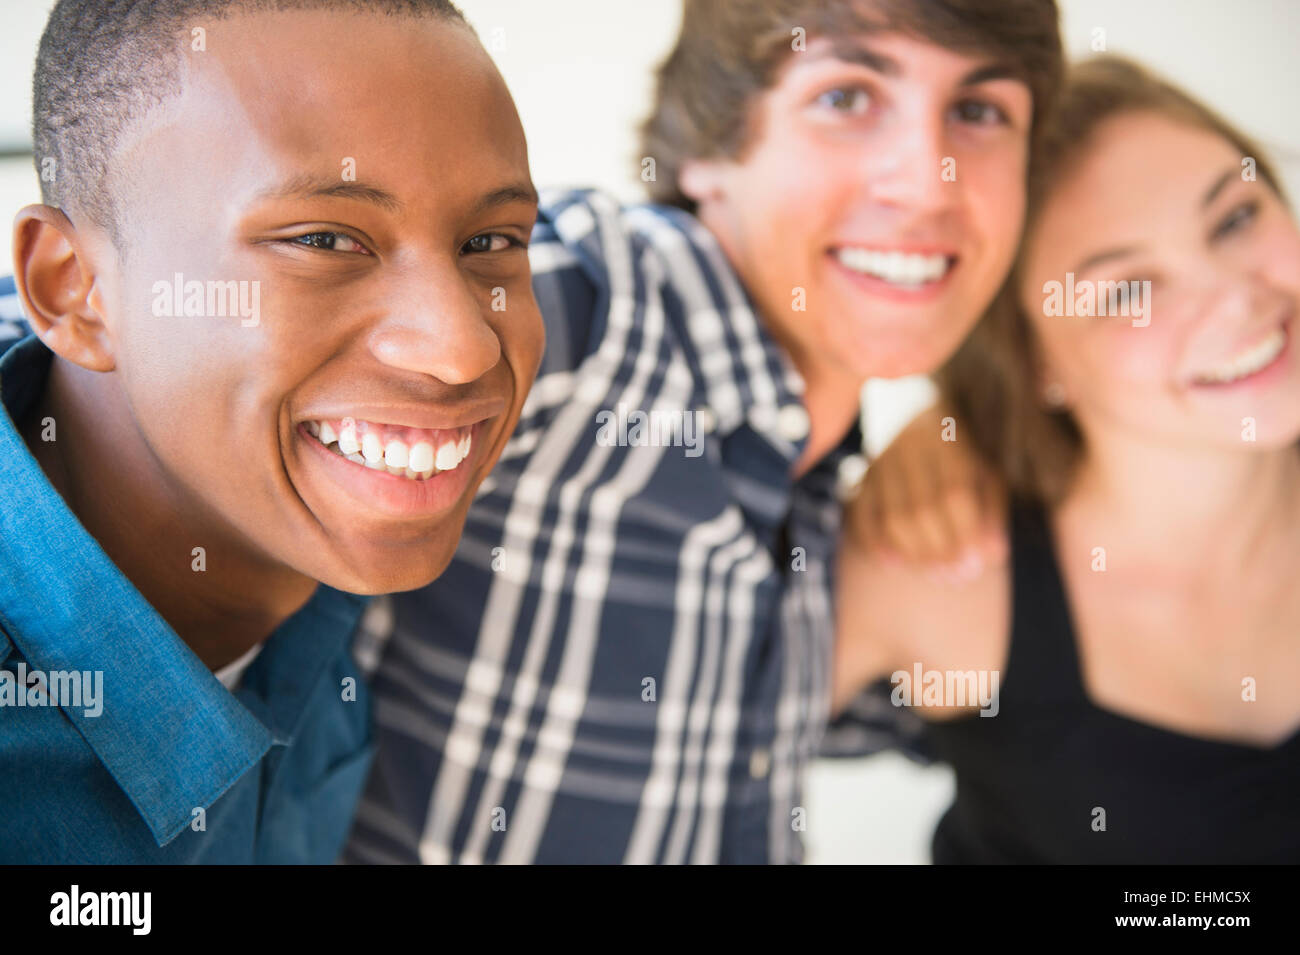 Teenagers hugging and smiling Stock Photo